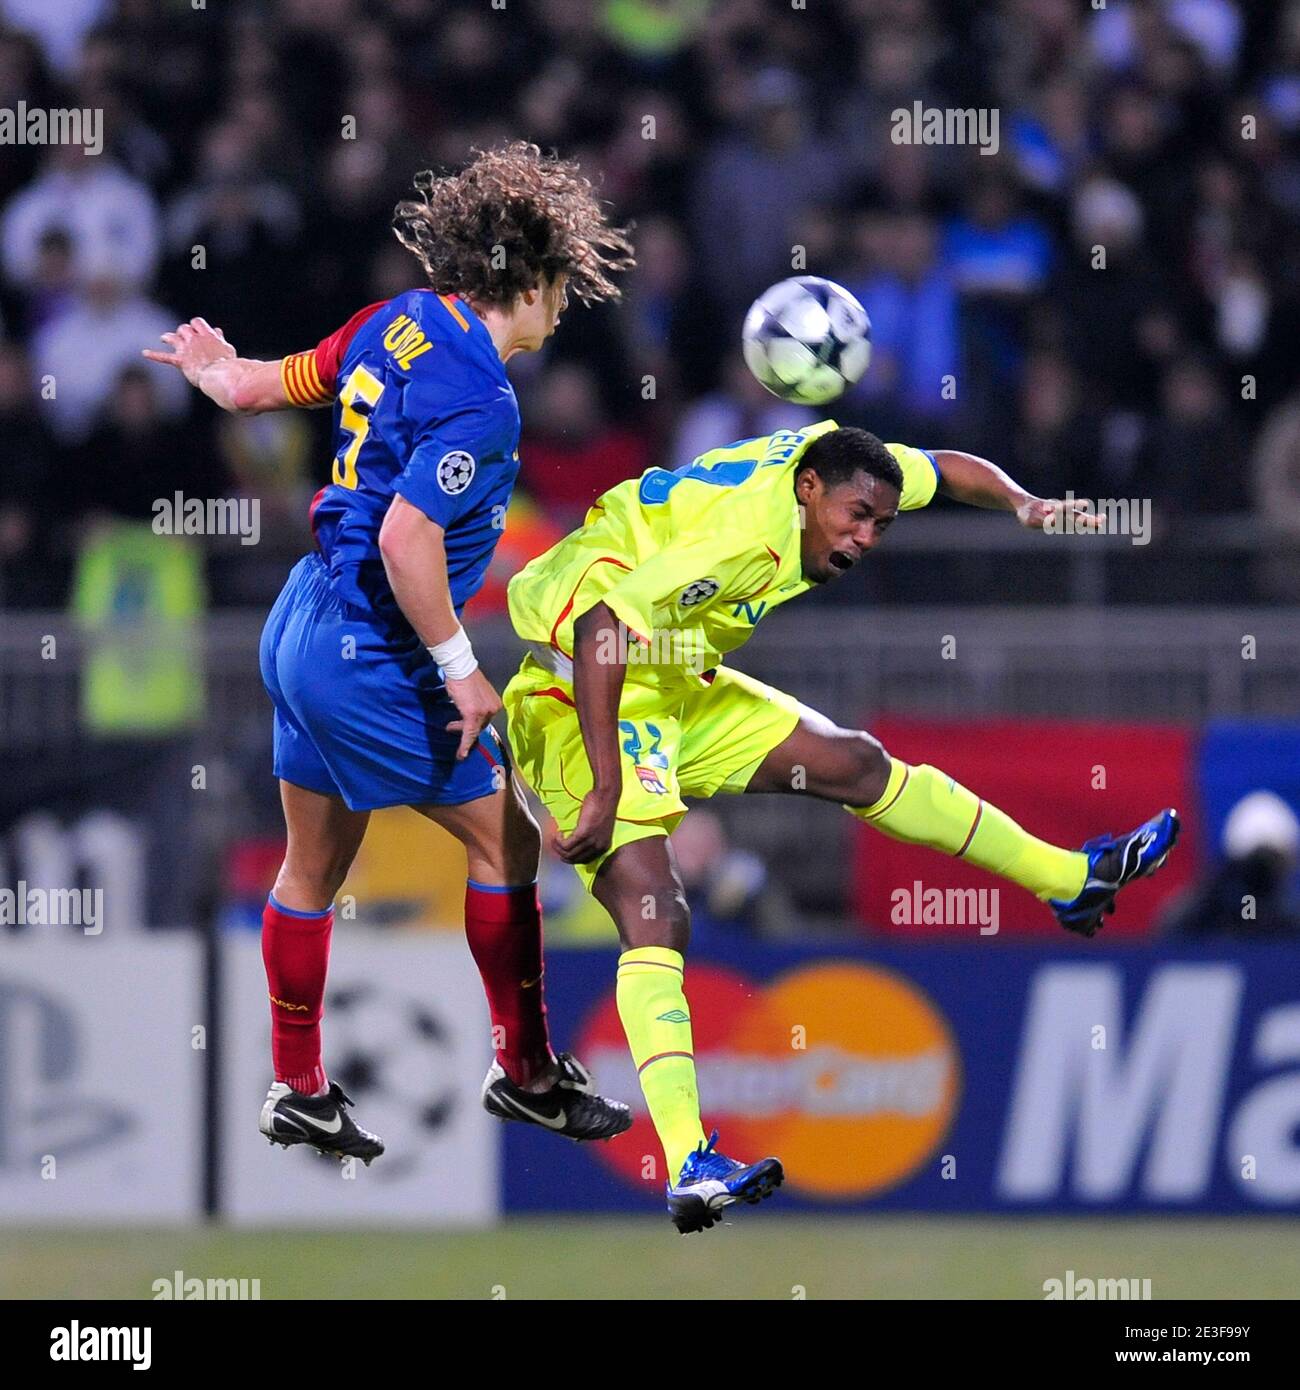 Barcelona's Carles Puyol and Lyon's Kader Keita battle for the ball in air  during the UEFA Champions League - First Knockout Round - First Leg - Lyon  vs Barcelona in Lyon, France